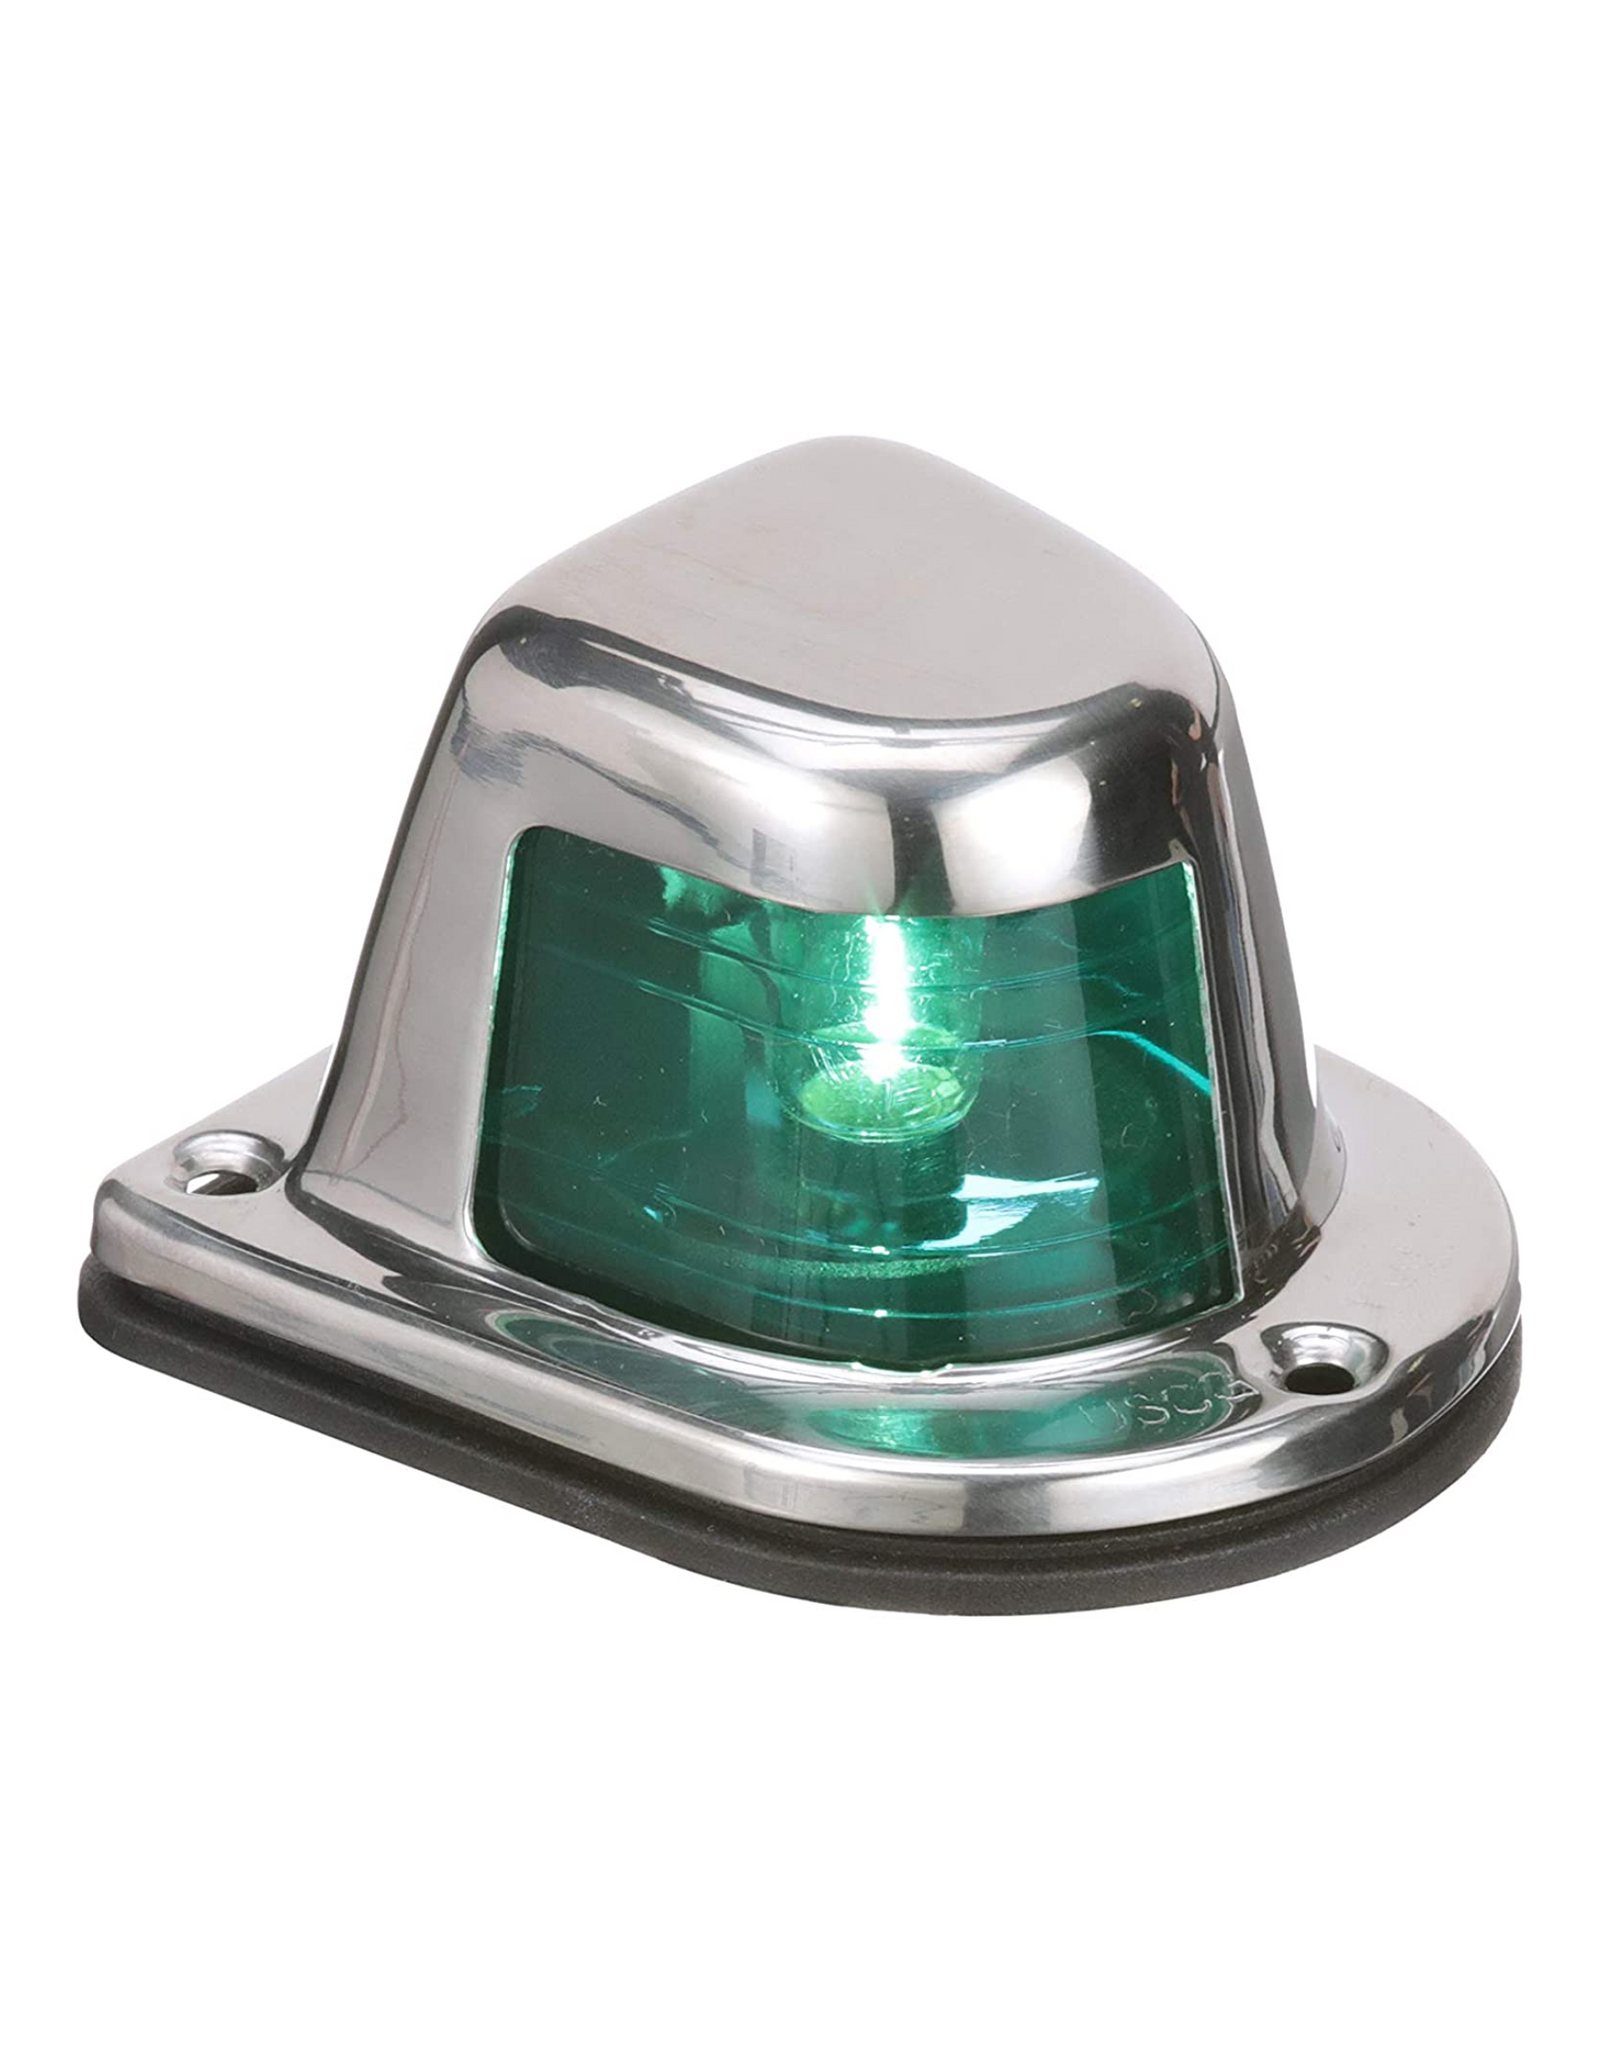 Attwood Stainless Steel 1-Mile Deck Mount Sidelight, 12 Volts, Green Lens